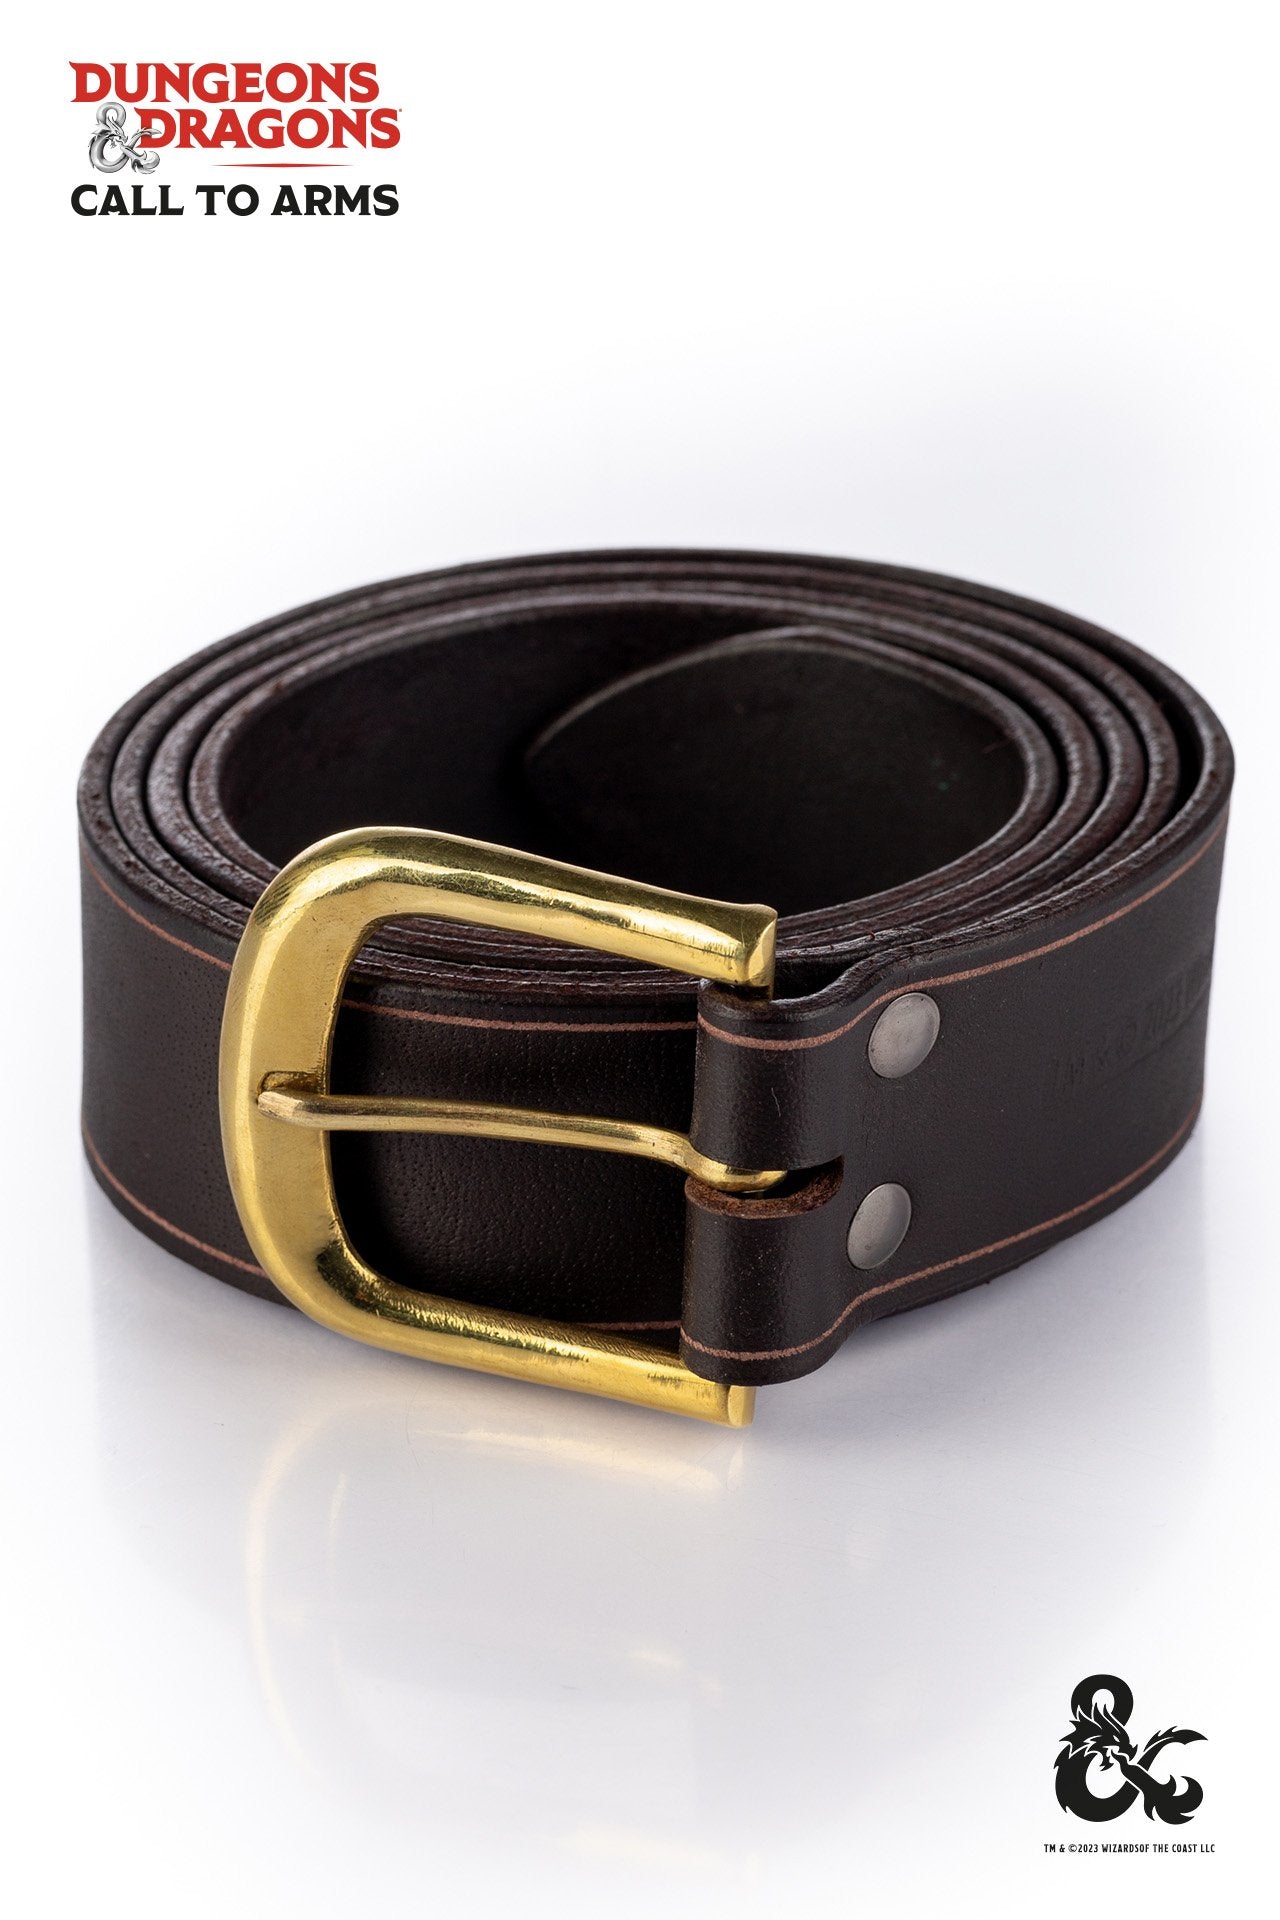 Dungeons & Dragons Leather Belt Brown